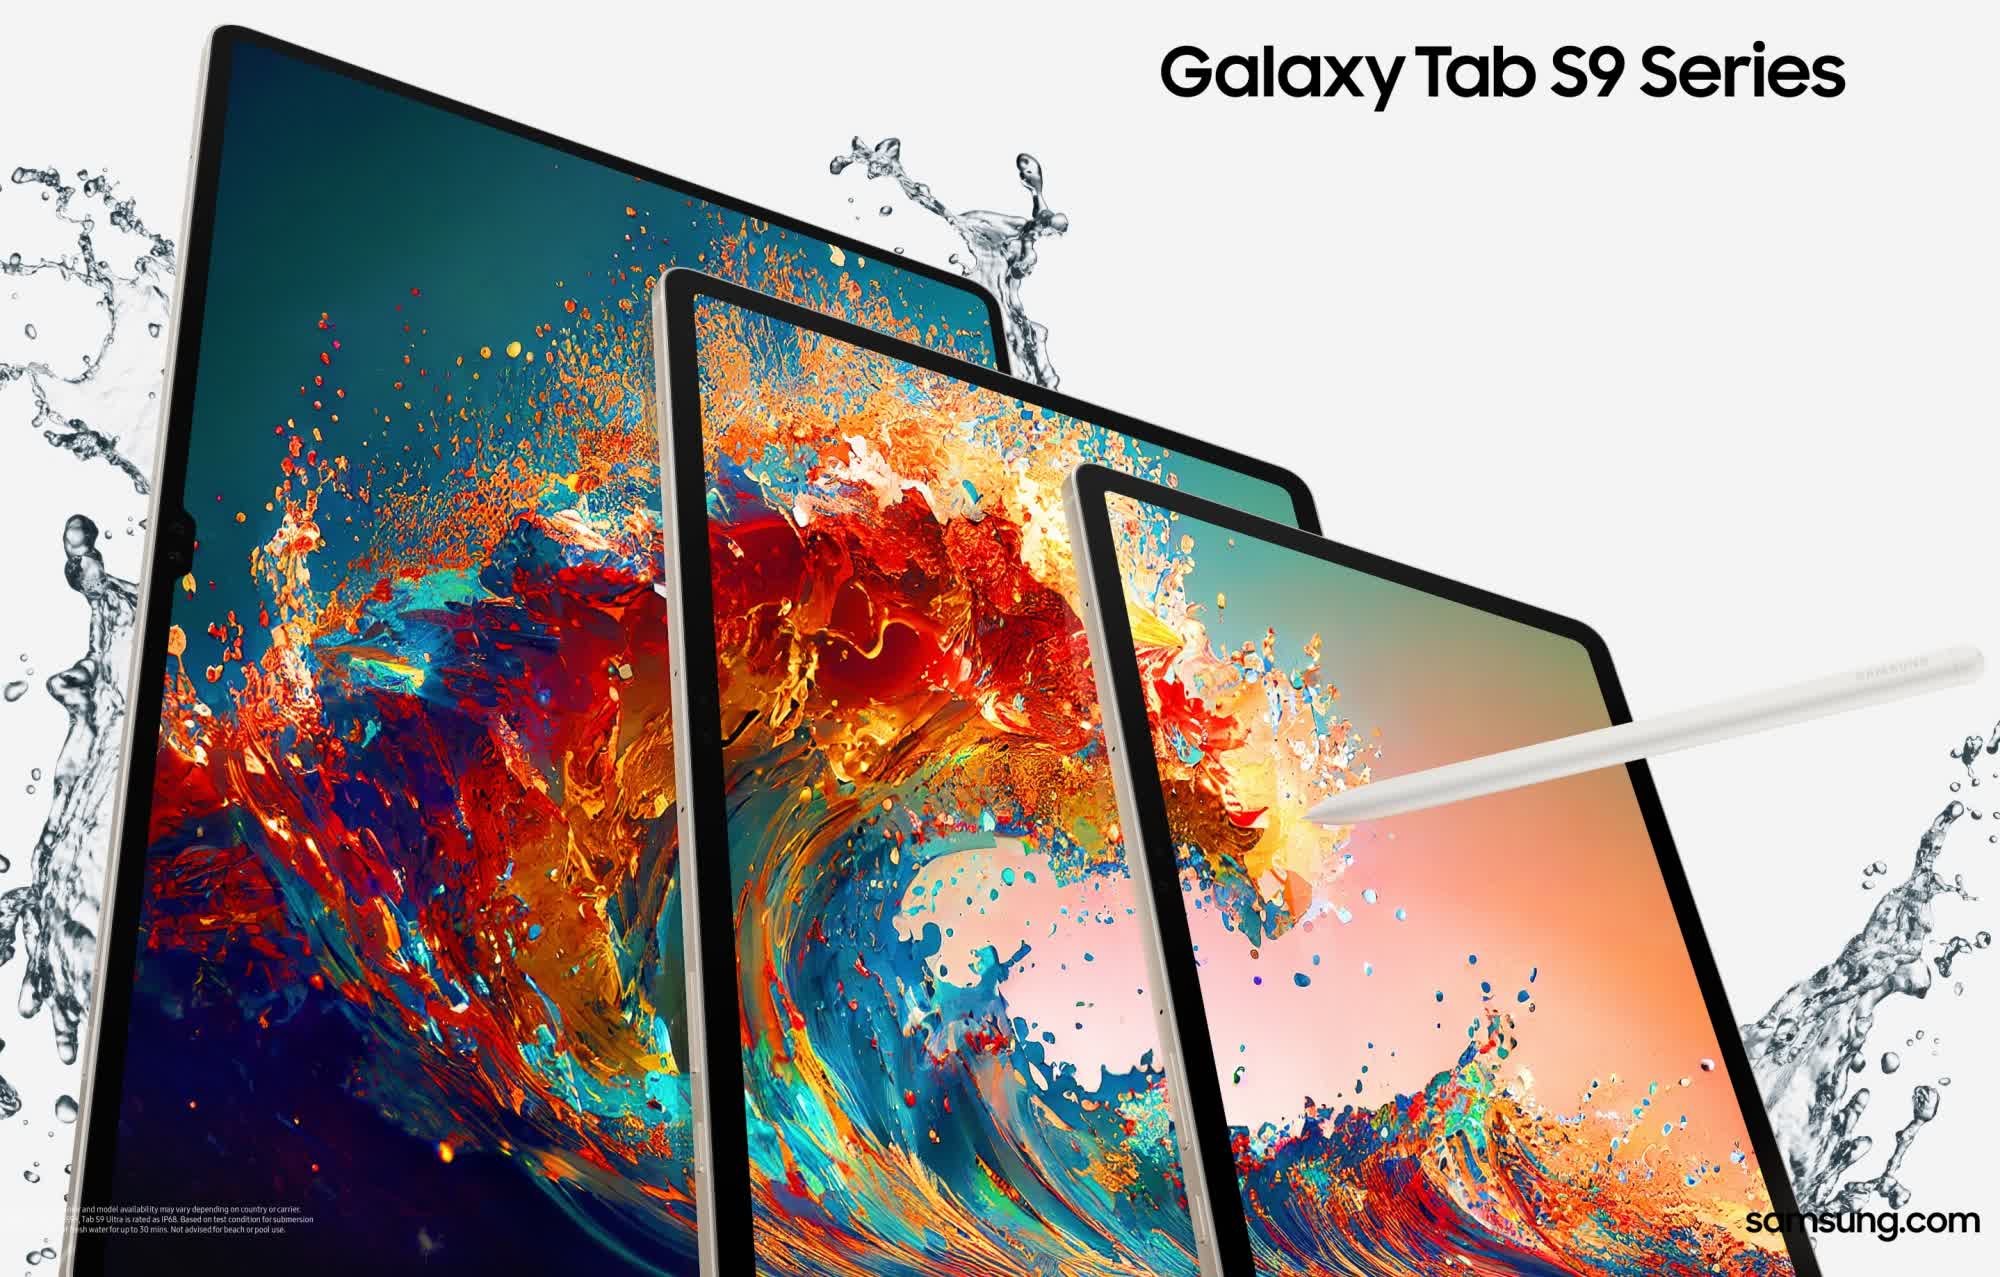 Samsung Galaxy Tab S9 series launches with 120Hz displays, IP68 rating, and more